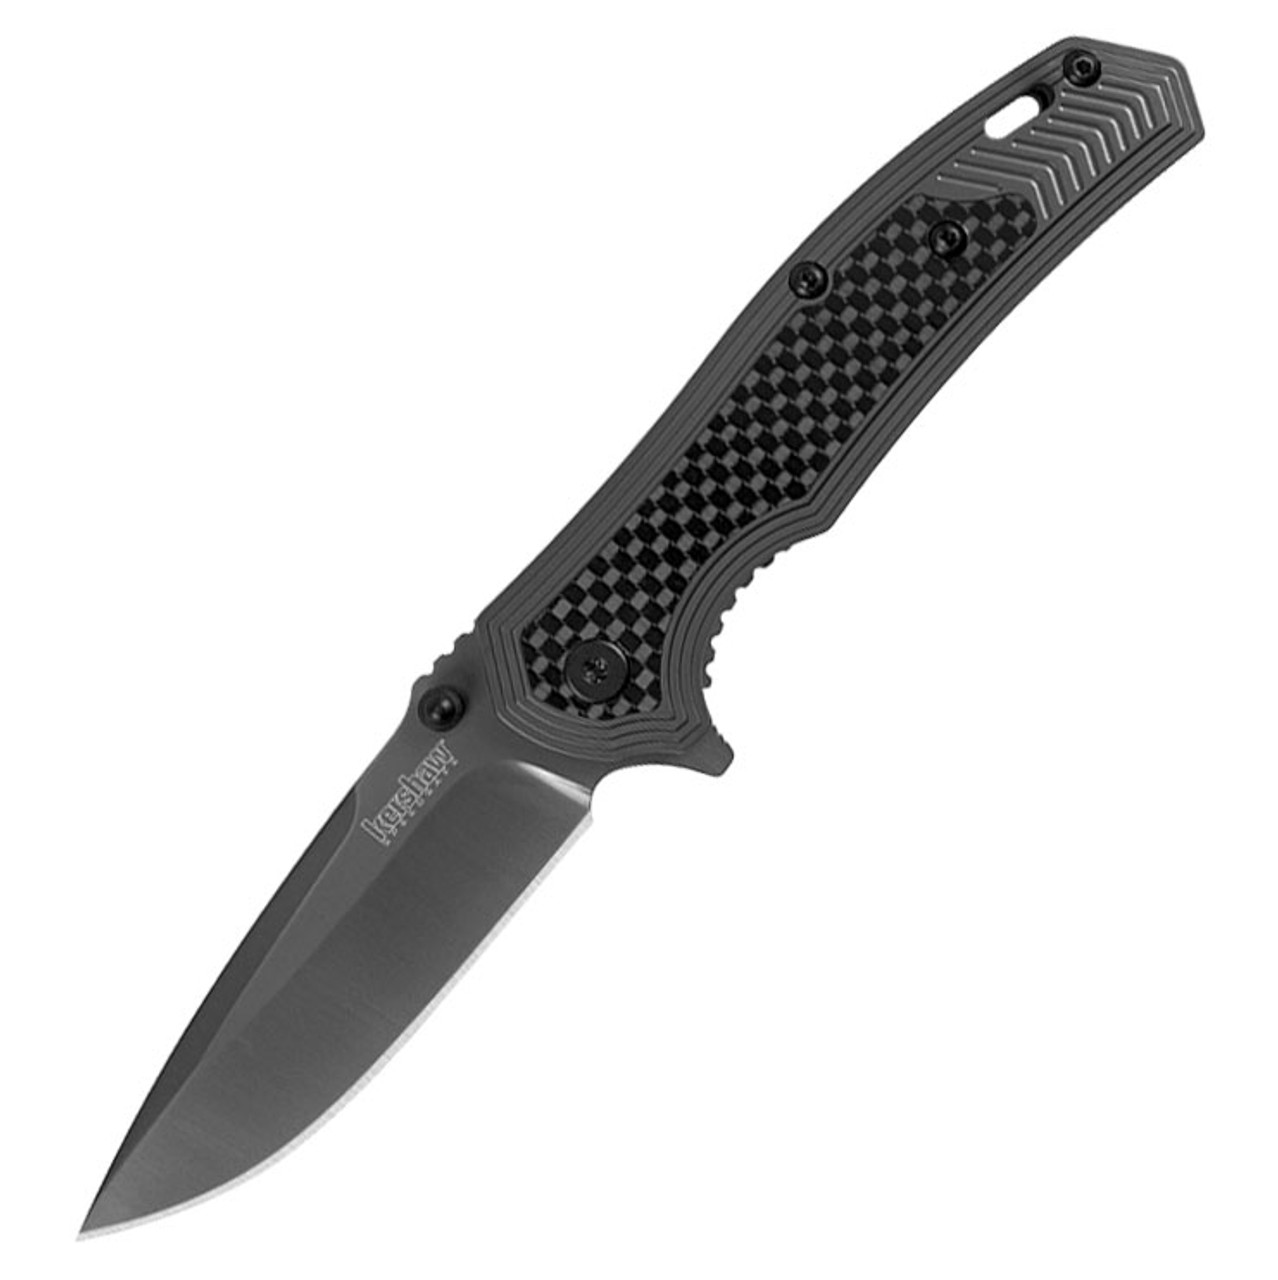 Kershaw Fringe Assisted Opening Knife (8310)- 3.00" Titanium Carbo-Nitride Coated 8Cr13MoV Drop Point Blade, Titanium Carbo-Nitride Coated Stainless Steel Handle